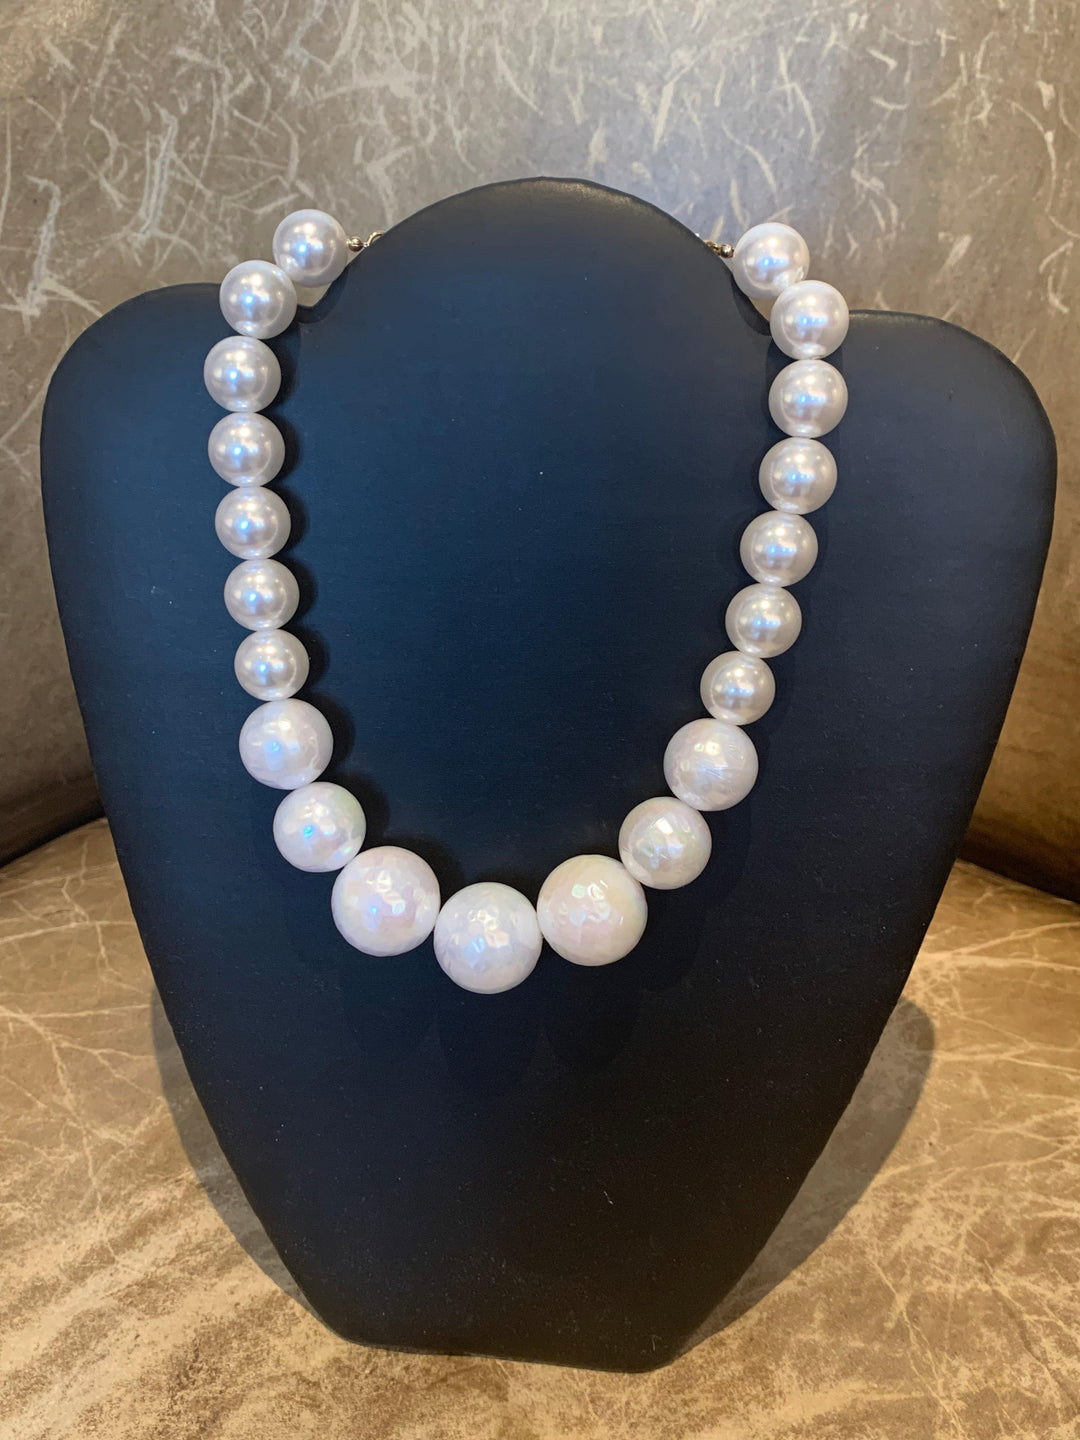 These large pearls can be found in Houston Texas on Eastside